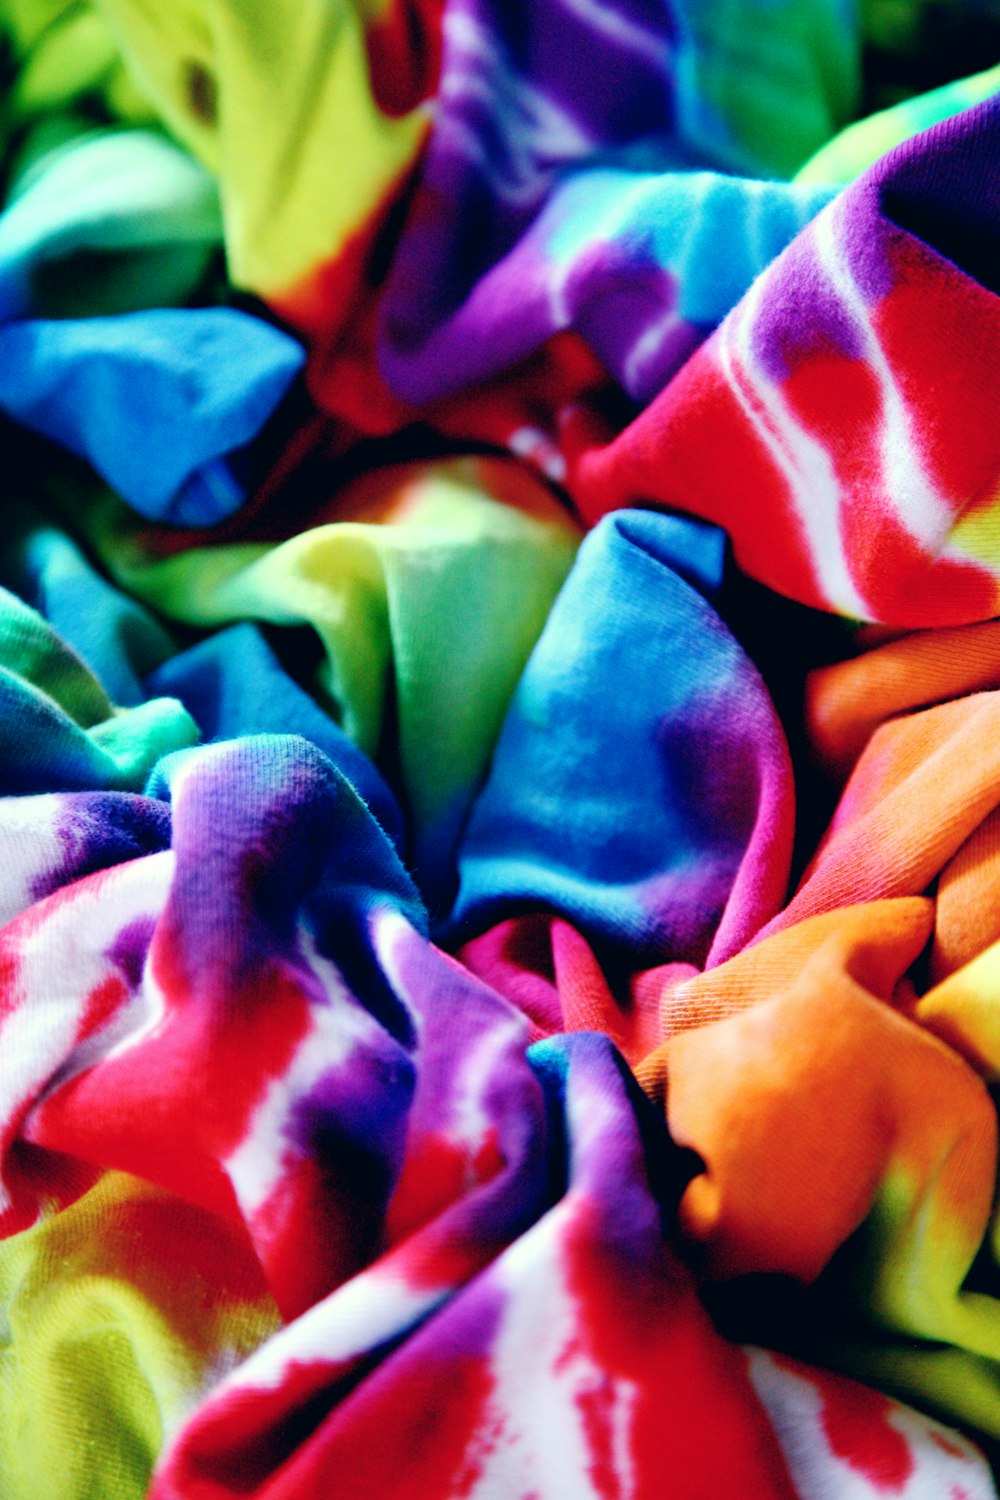 1K+ Tie Dye Pictures  Download Free Images on Unsplash